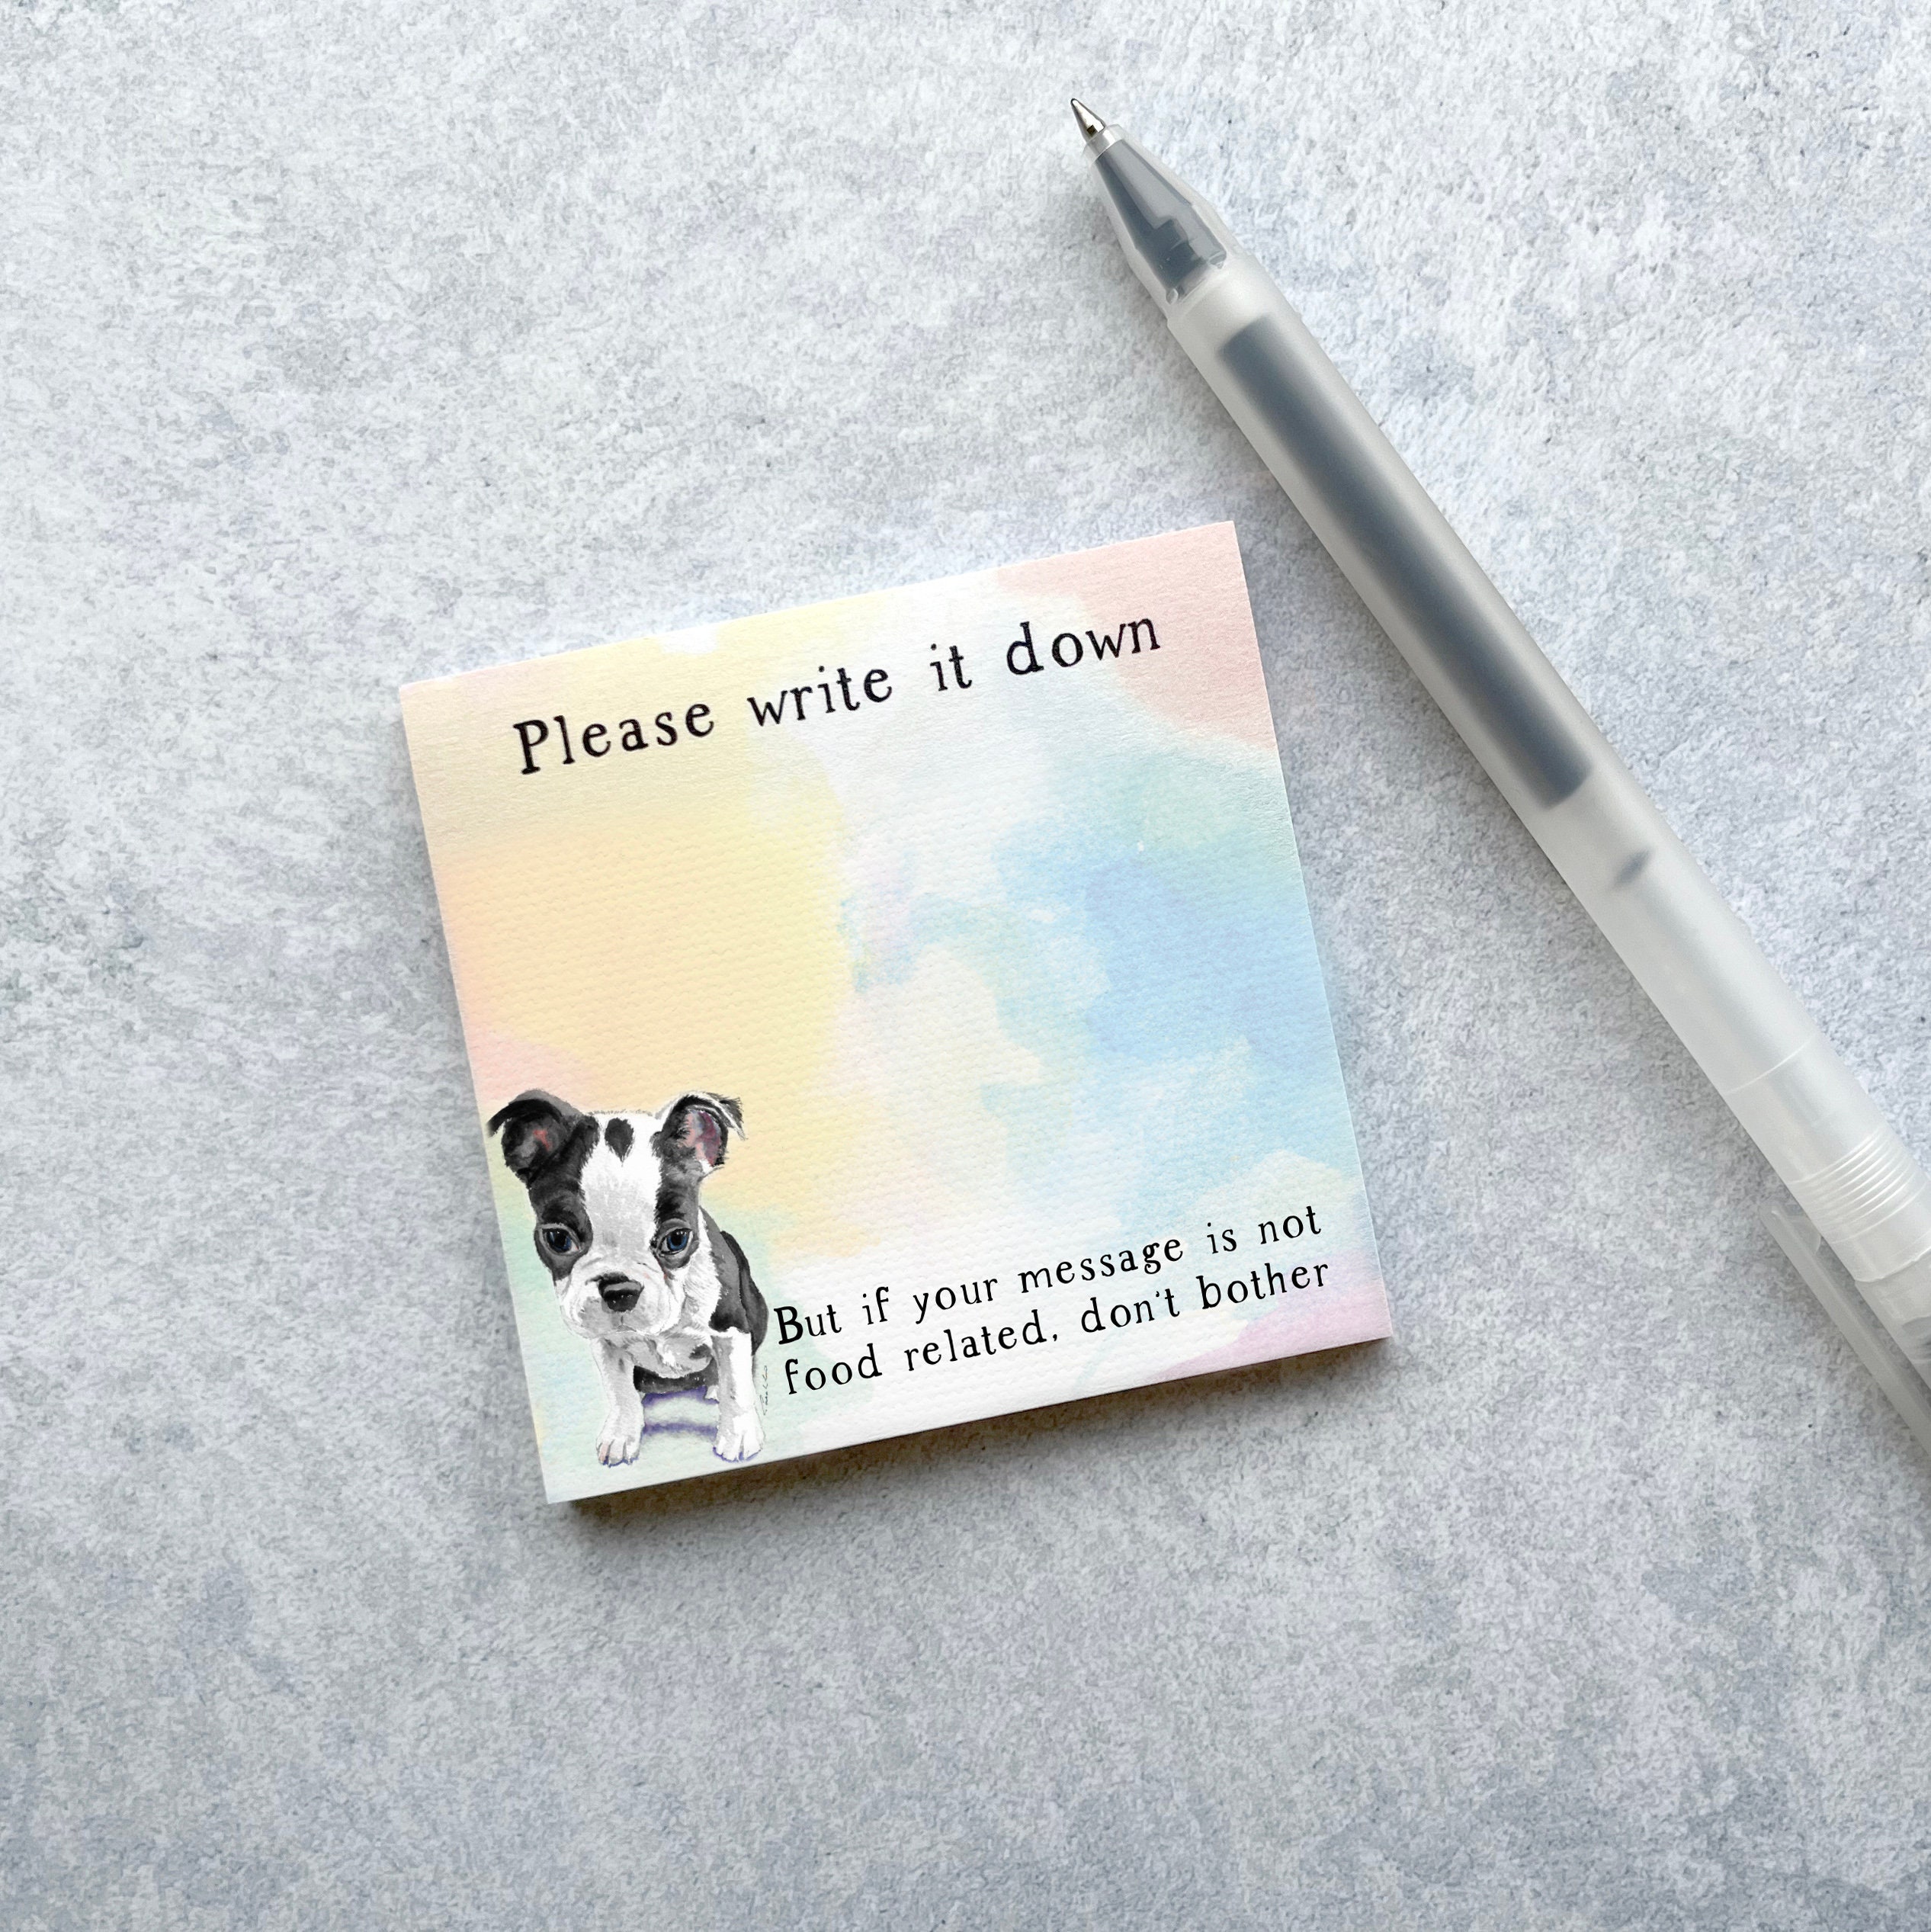 Fresh Outta Fucks Pad and Pen, Humorous Funny Office Desk Sticky Notes and  Pen Accessories Set, Snarky Novelty Office Supplies, Great Gift for